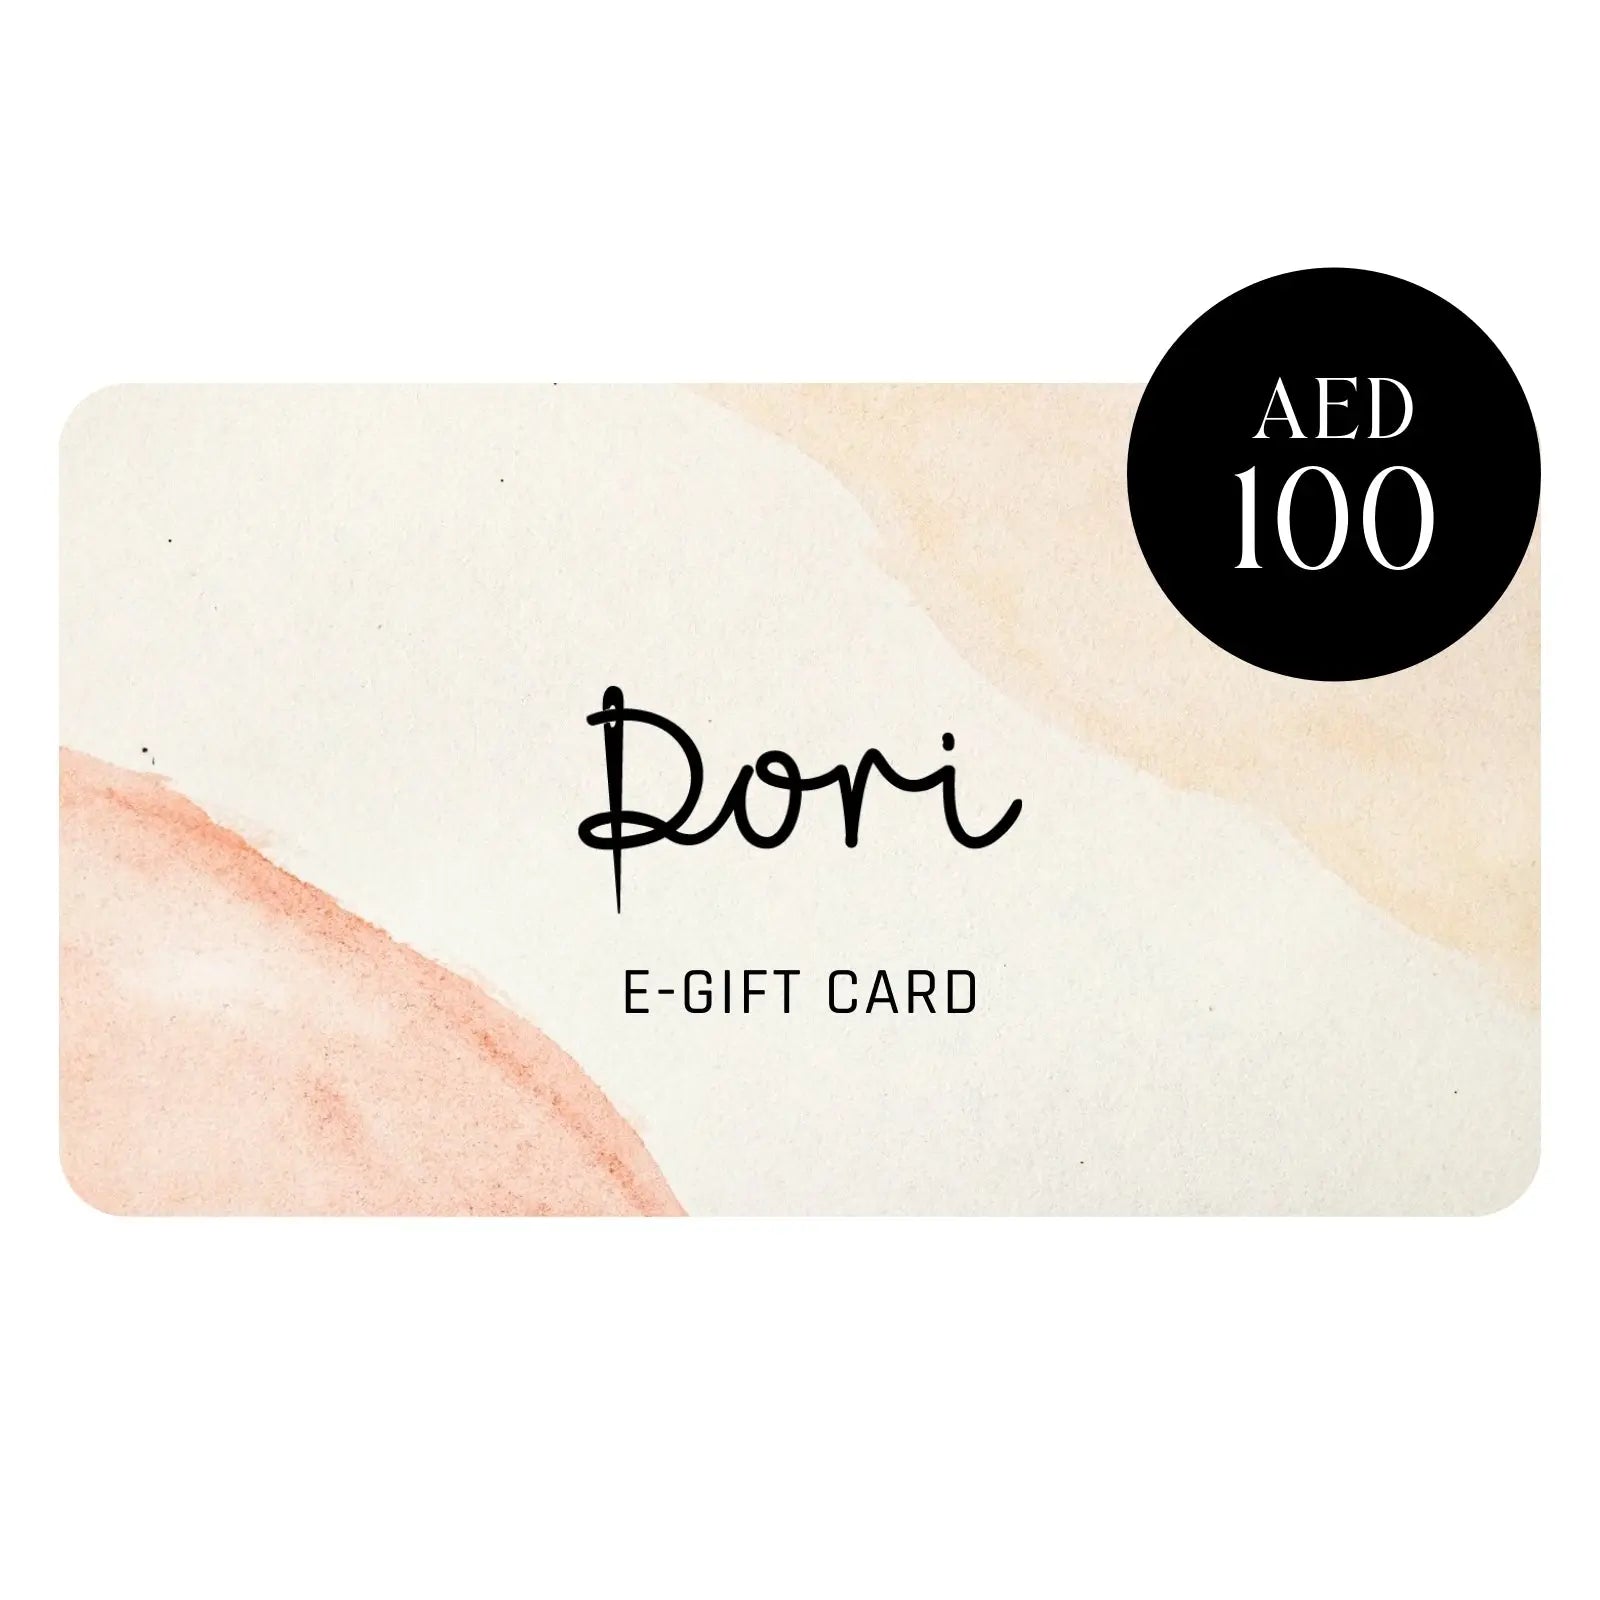 E-Gift Card (AED 100)- Handcrafted Jewellery from Dori